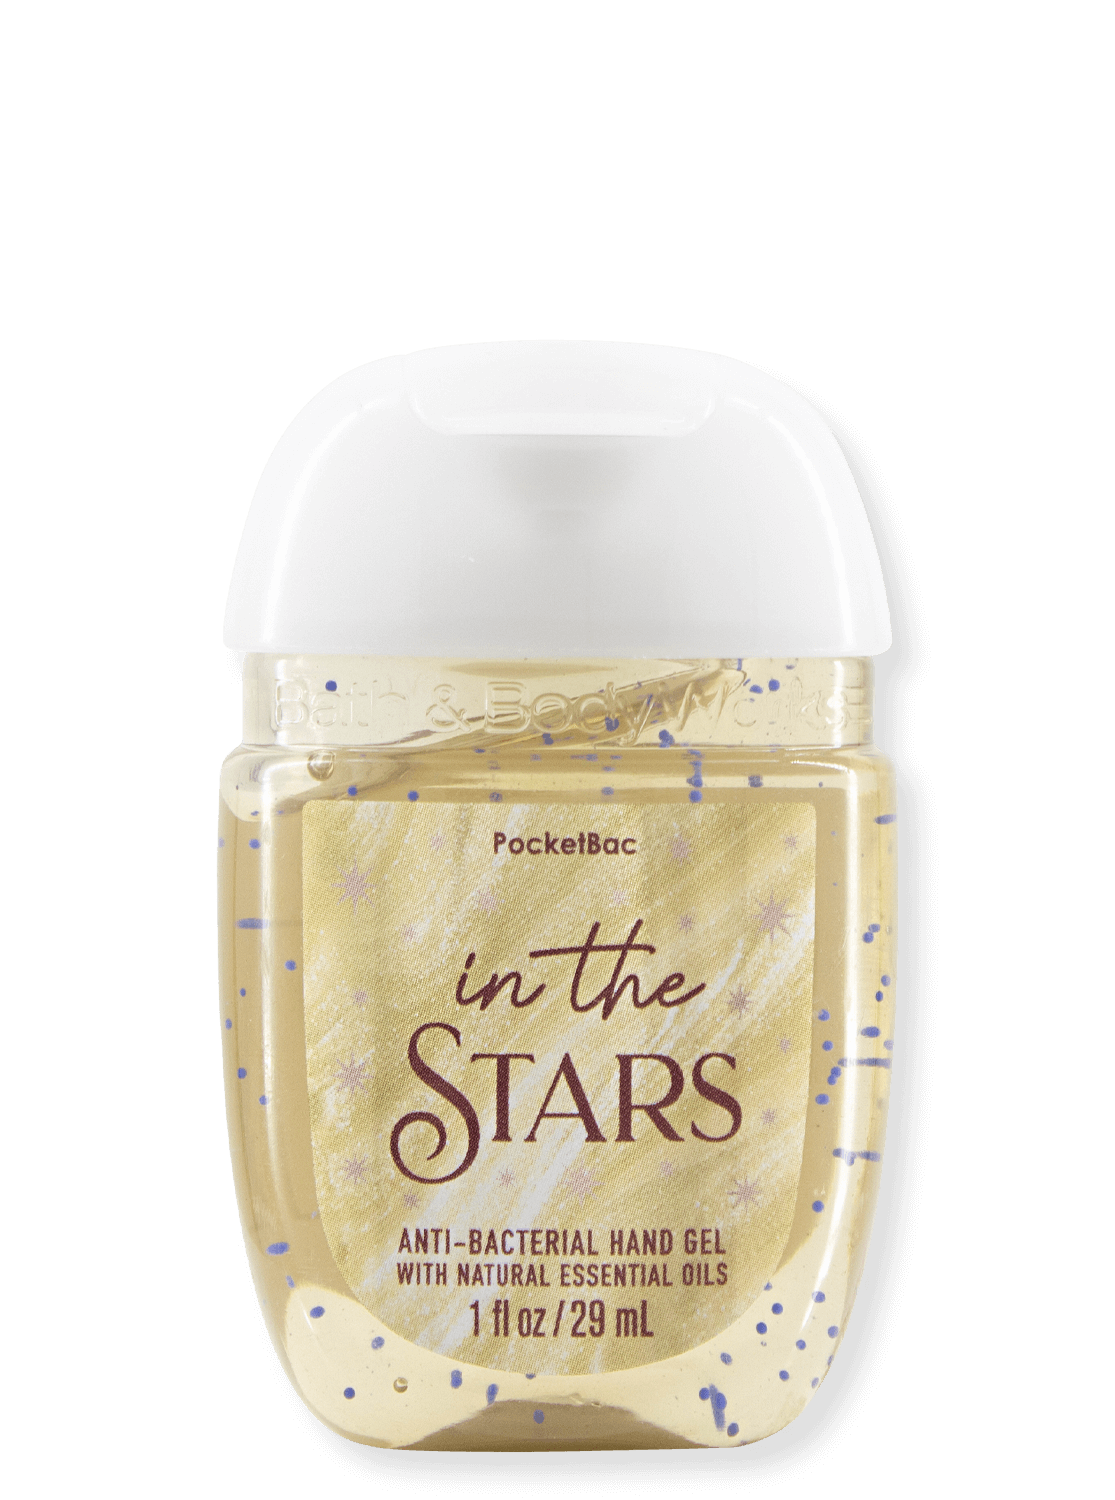 Hand disinfection gel - in the stars - 29ml